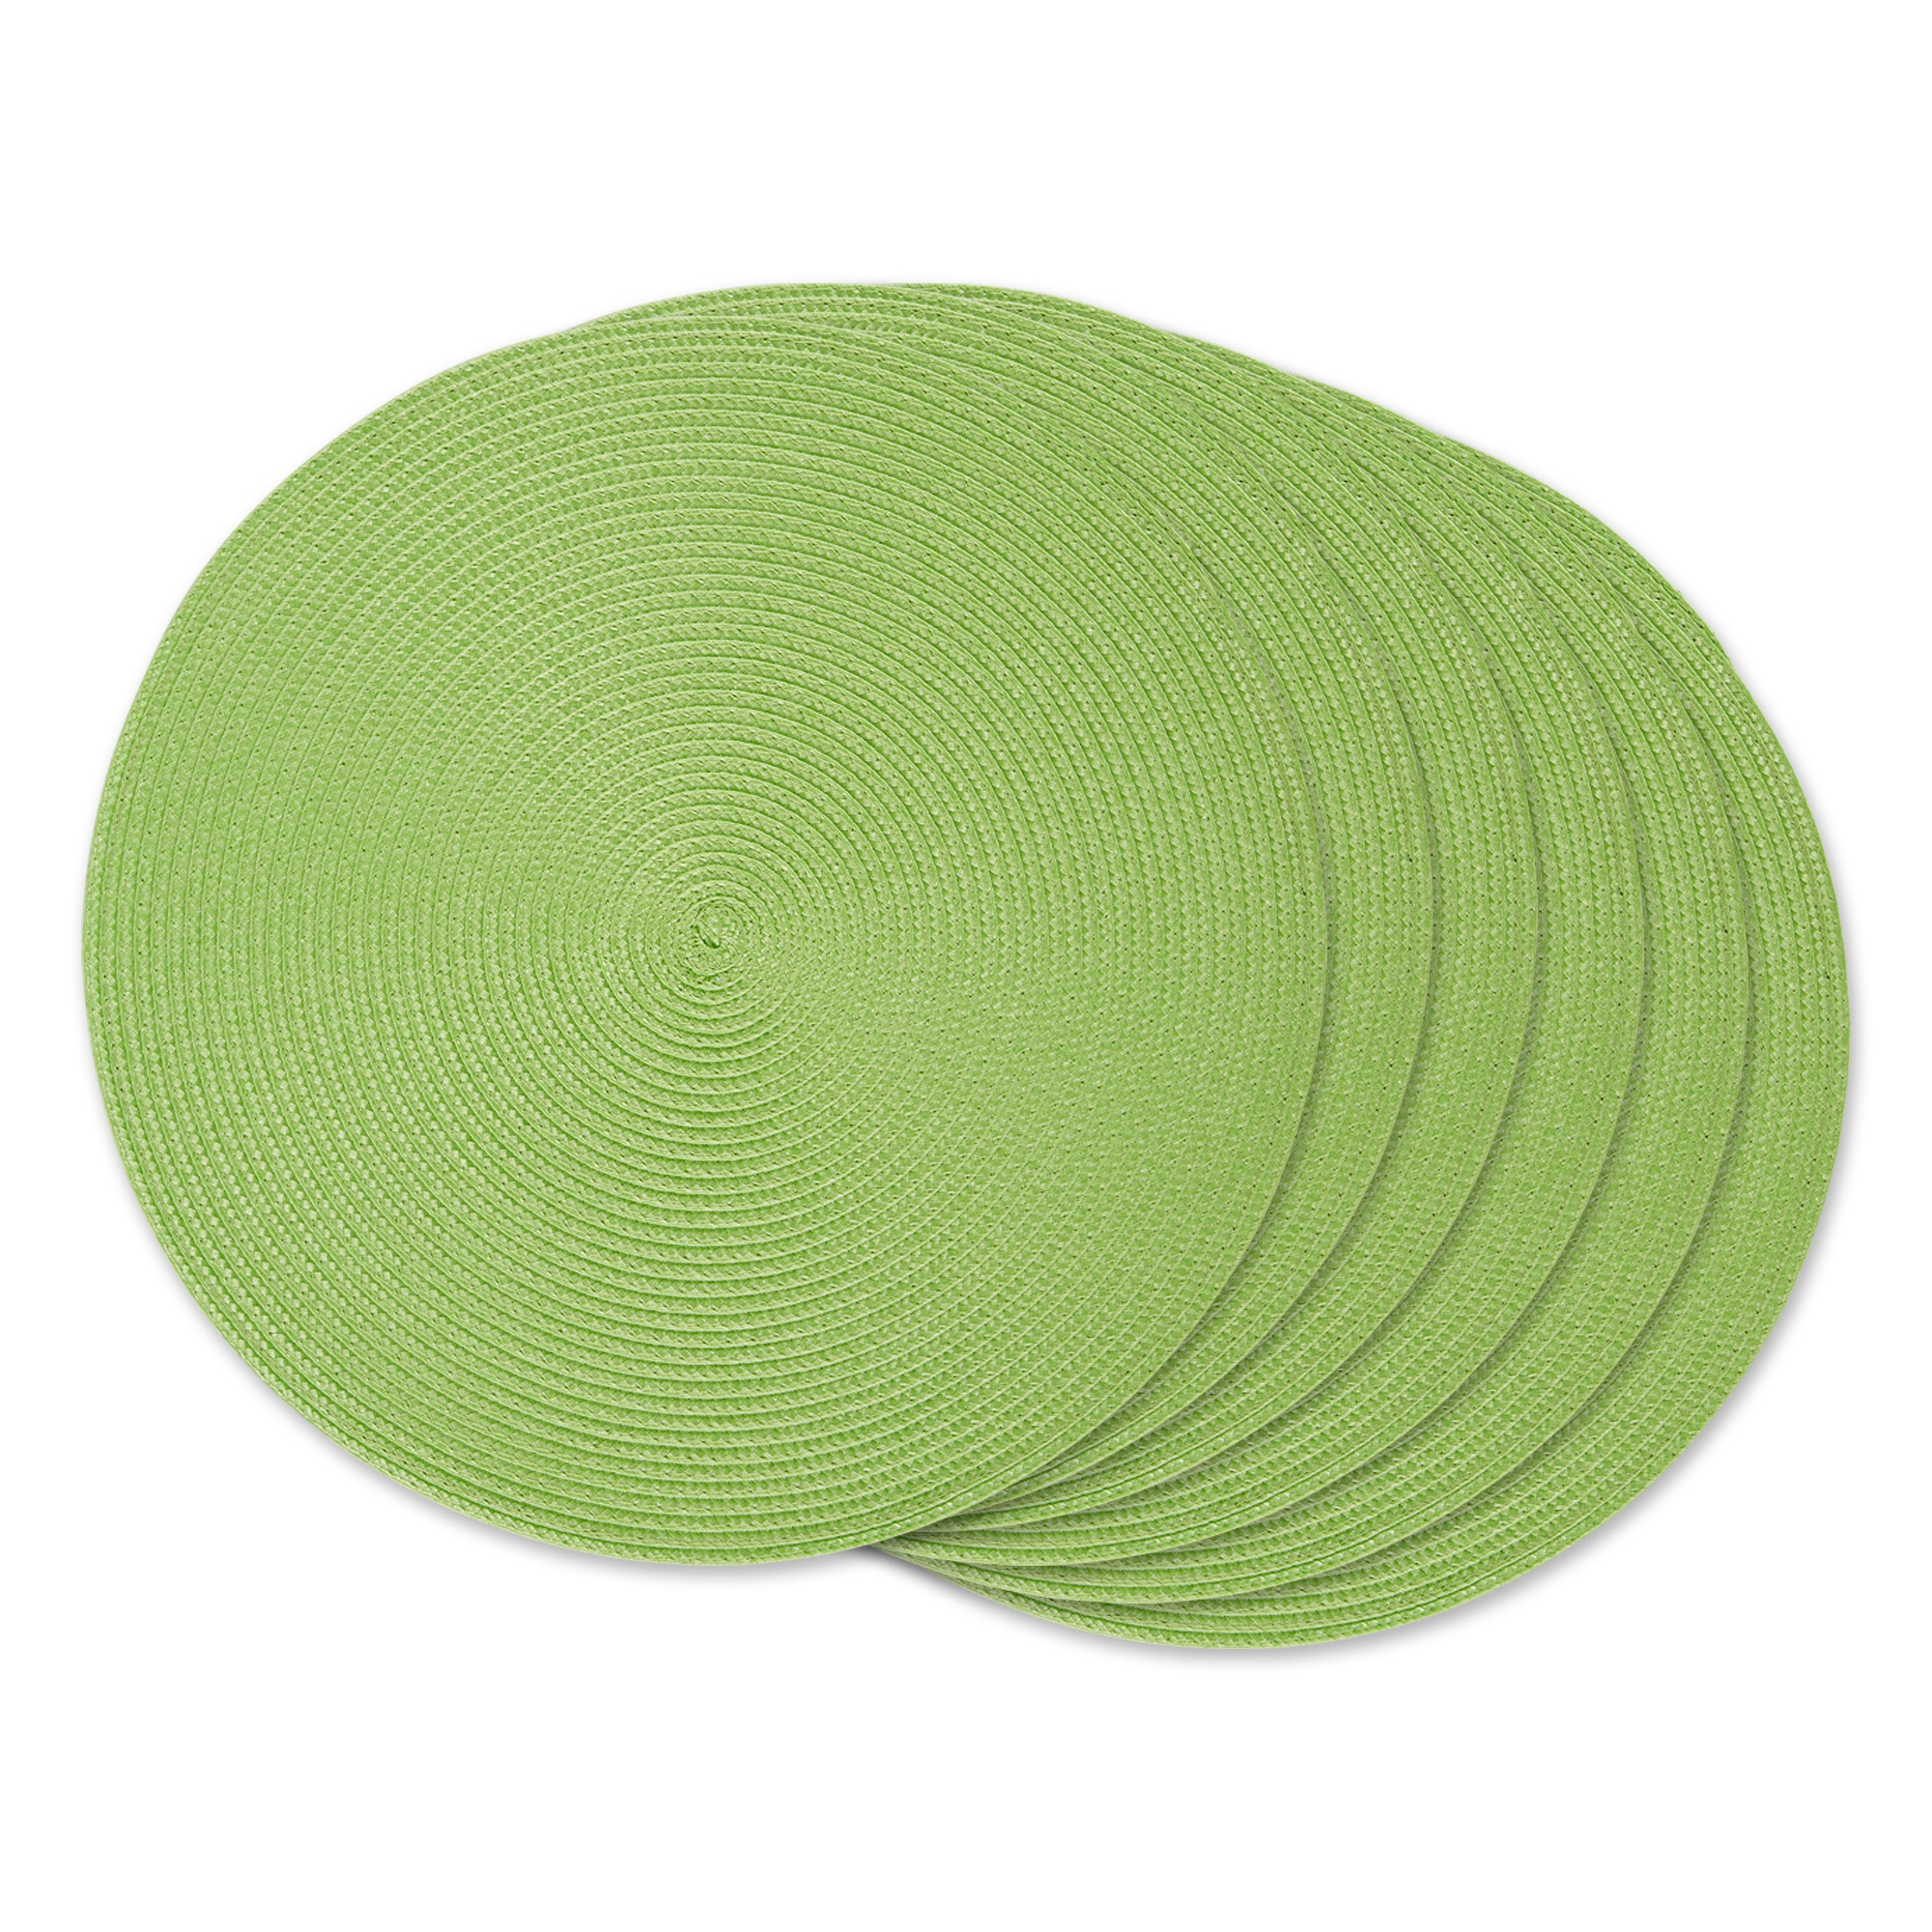 Design Imports Placemat Round Woven Lime Set Of 6